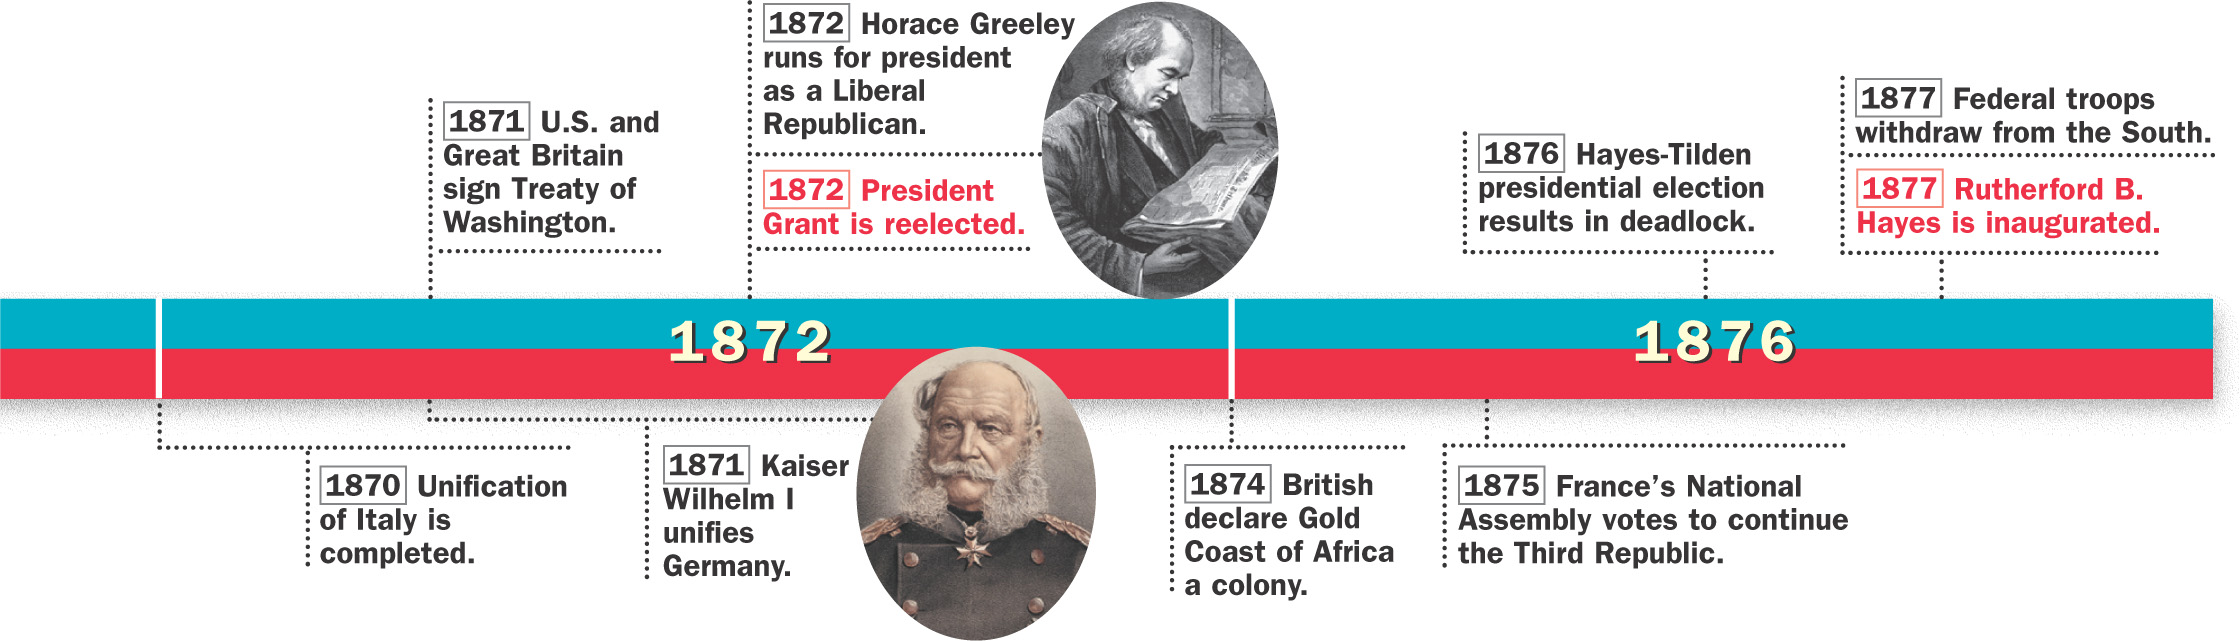 A timeline of historical events from 1864 to 1877 in both the U.S. and the world